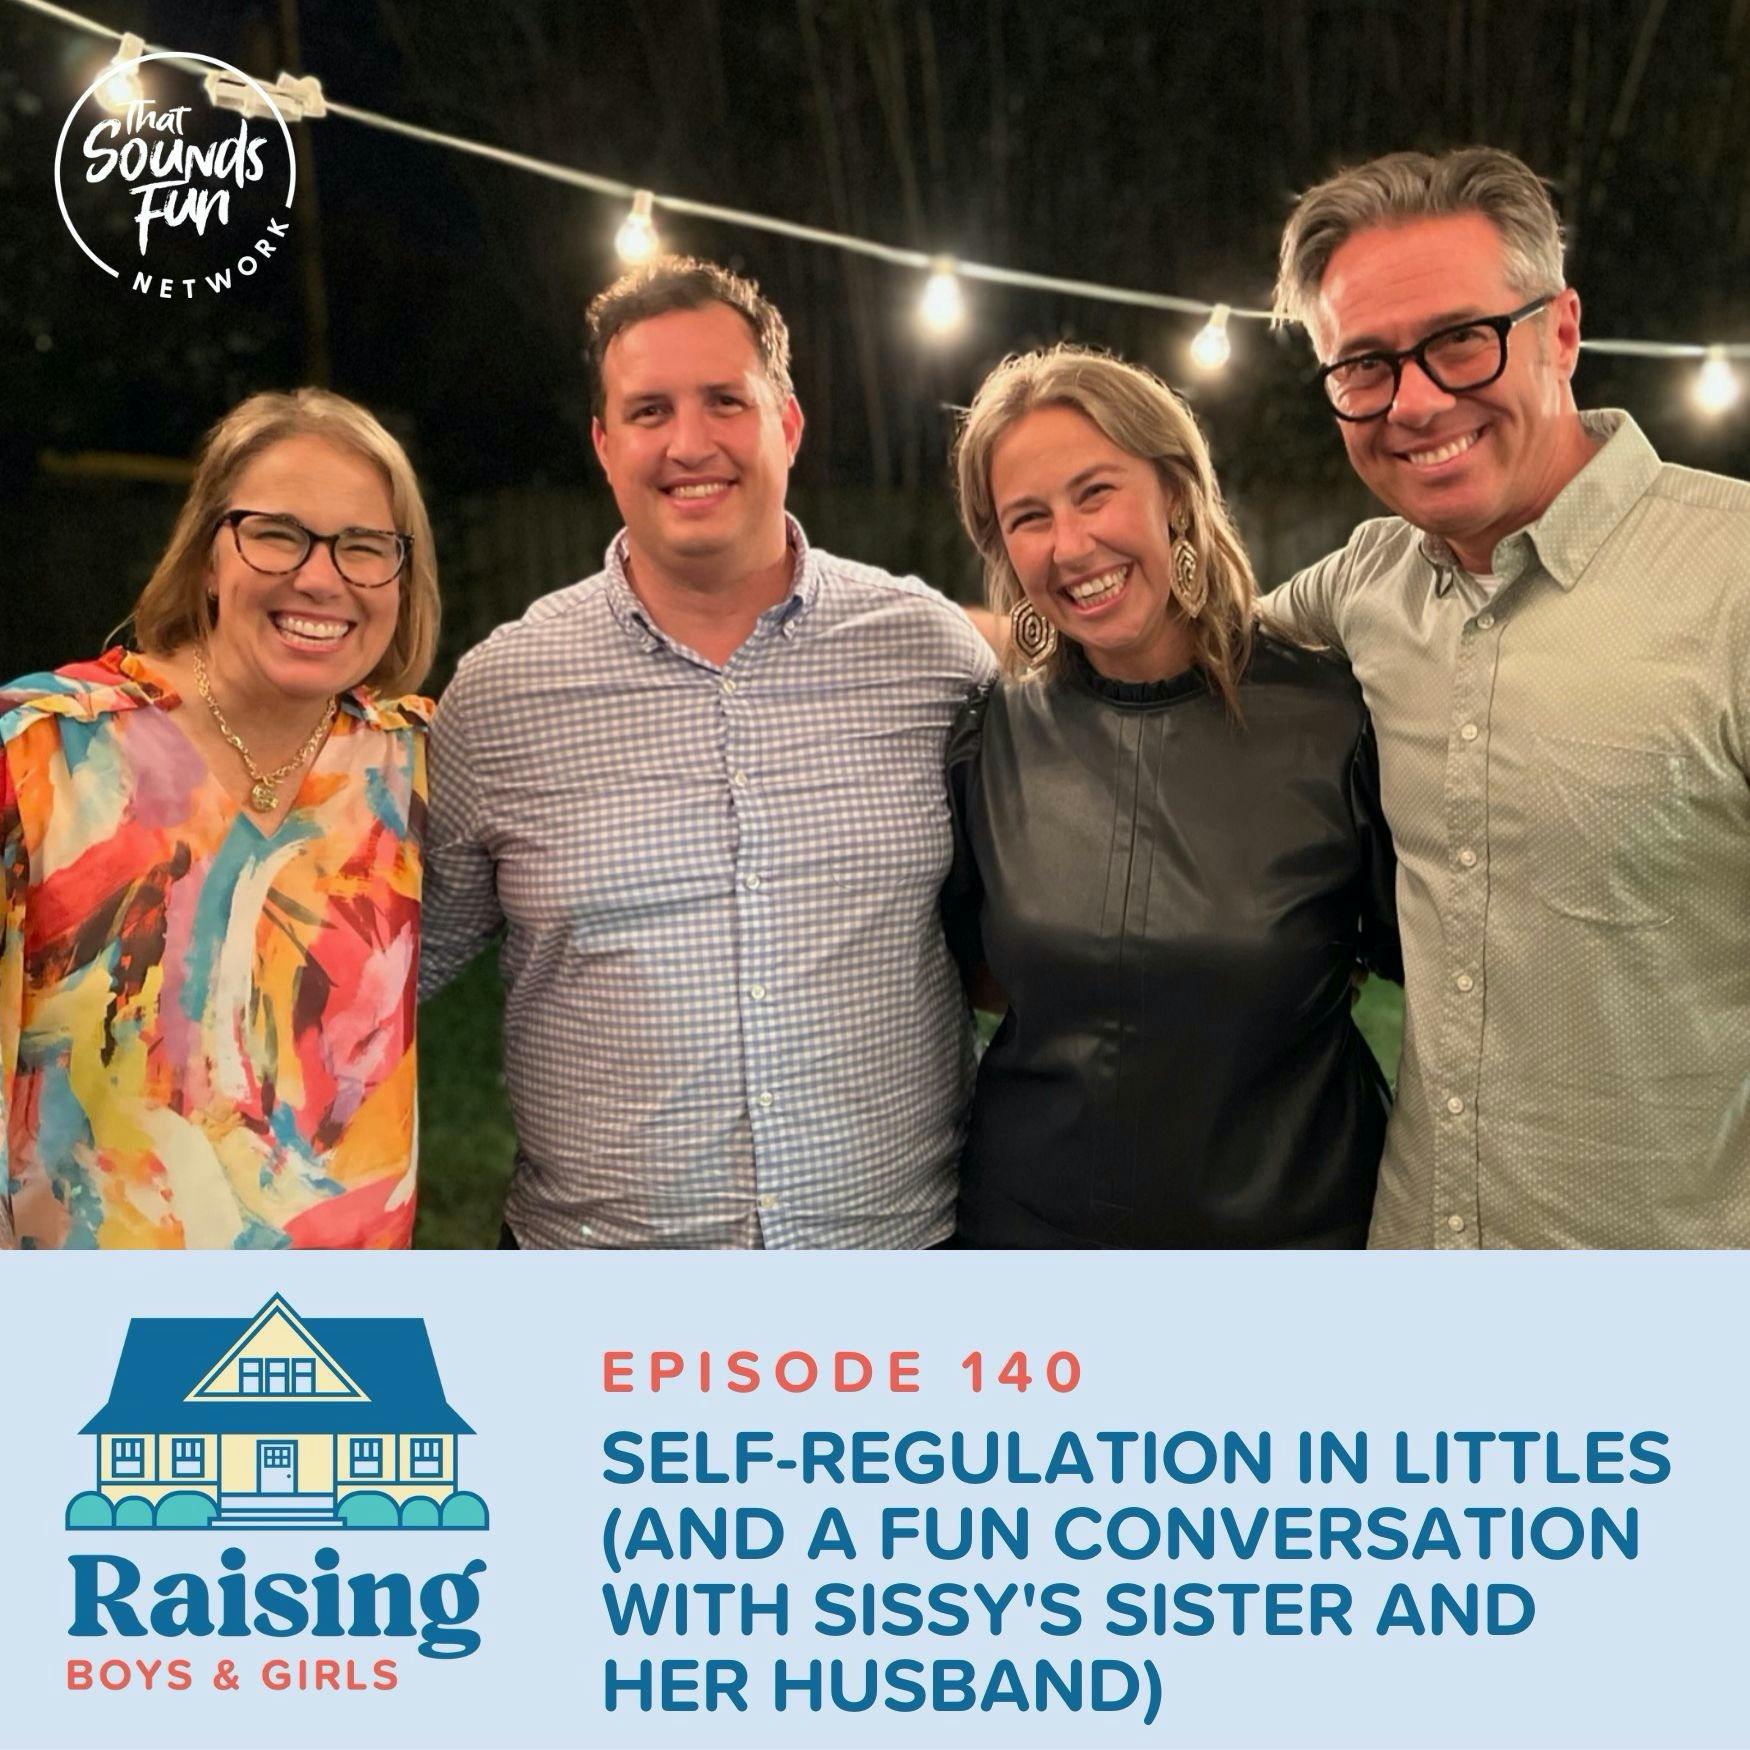 Episode 140: Self-Regulation in Littles (and a Fun Conversation with Sissy’s Sister and Her Husband)